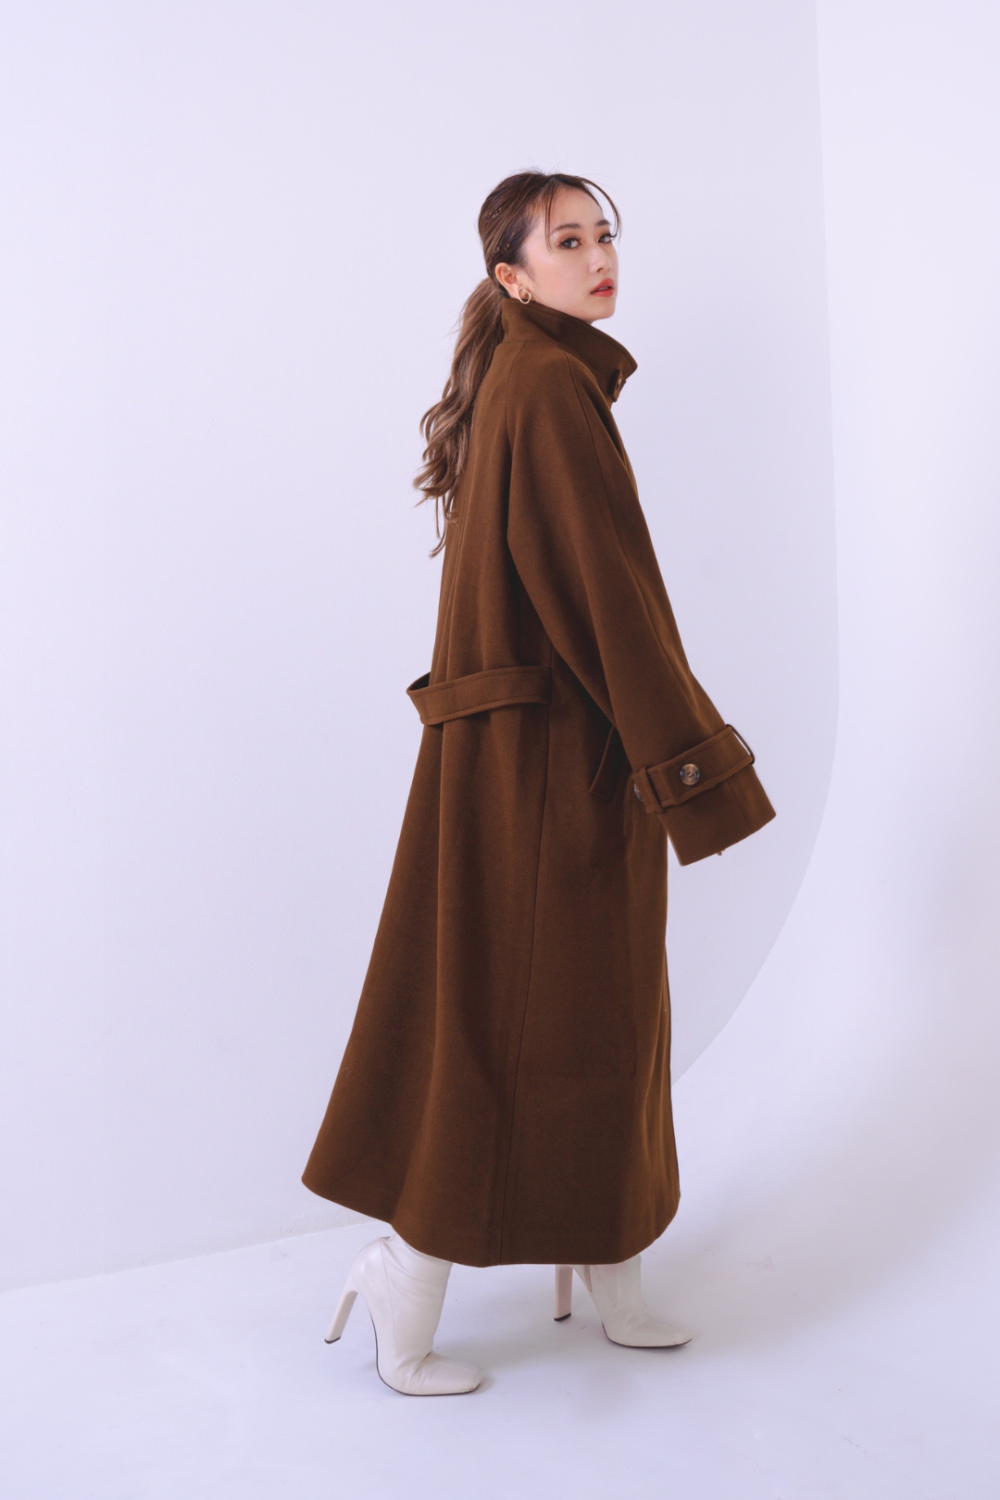 <img class='new_mark_img1' src='https://img.shop-pro.jp/img/new/icons8.gif' style='border:none;display:inline;margin:0px;padding:0px;width:auto;' />Soutien collar long coat -brown-